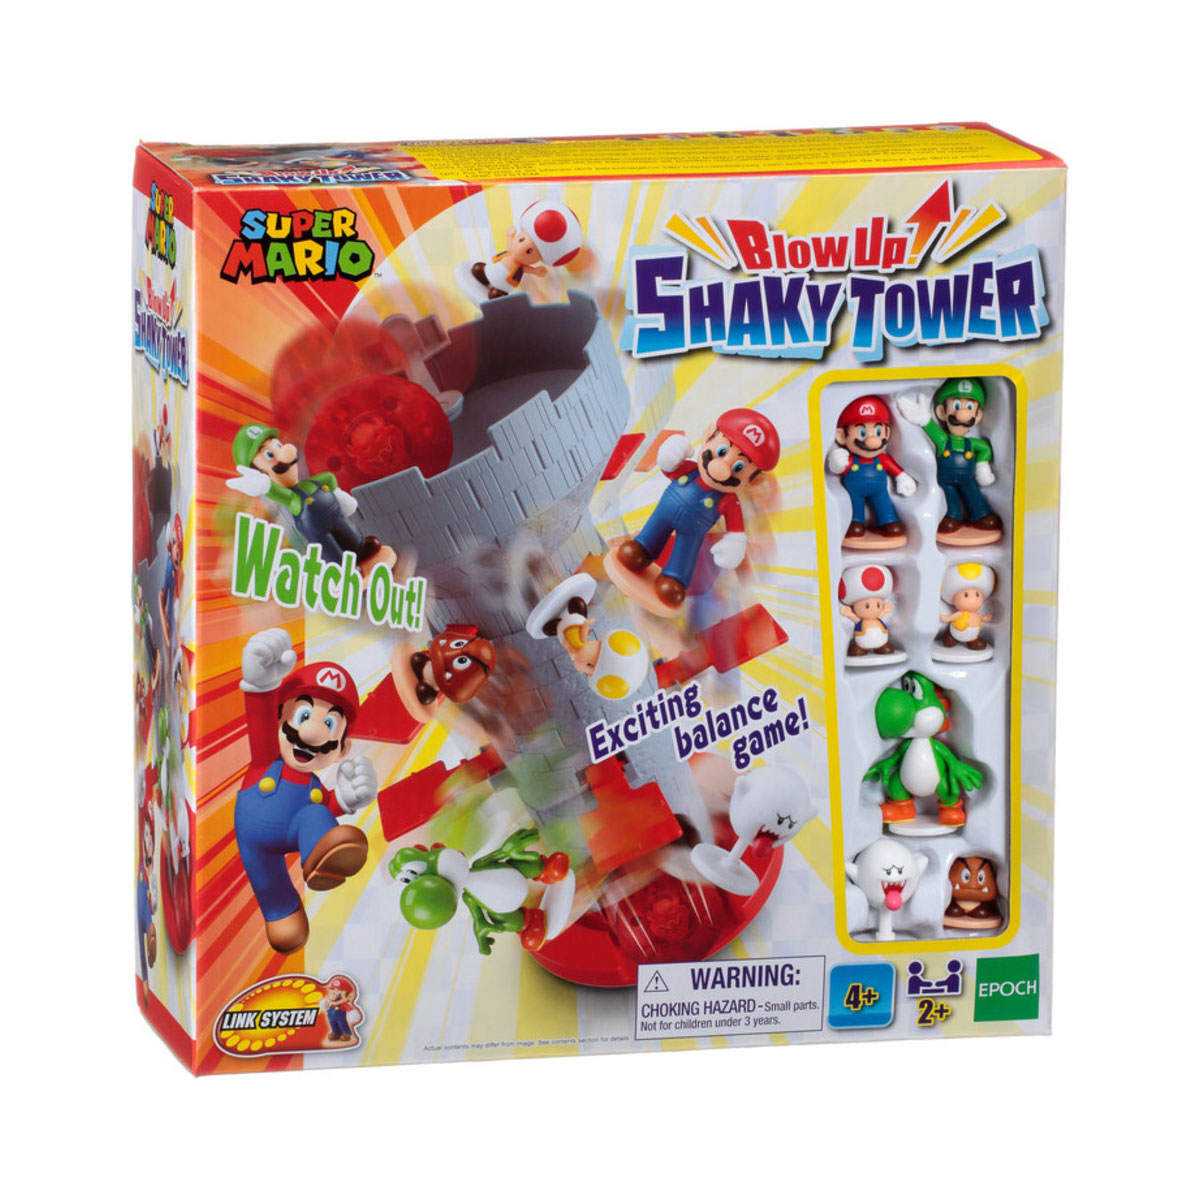 Super Mario Blow Up Shaky Tower Game from Epoch